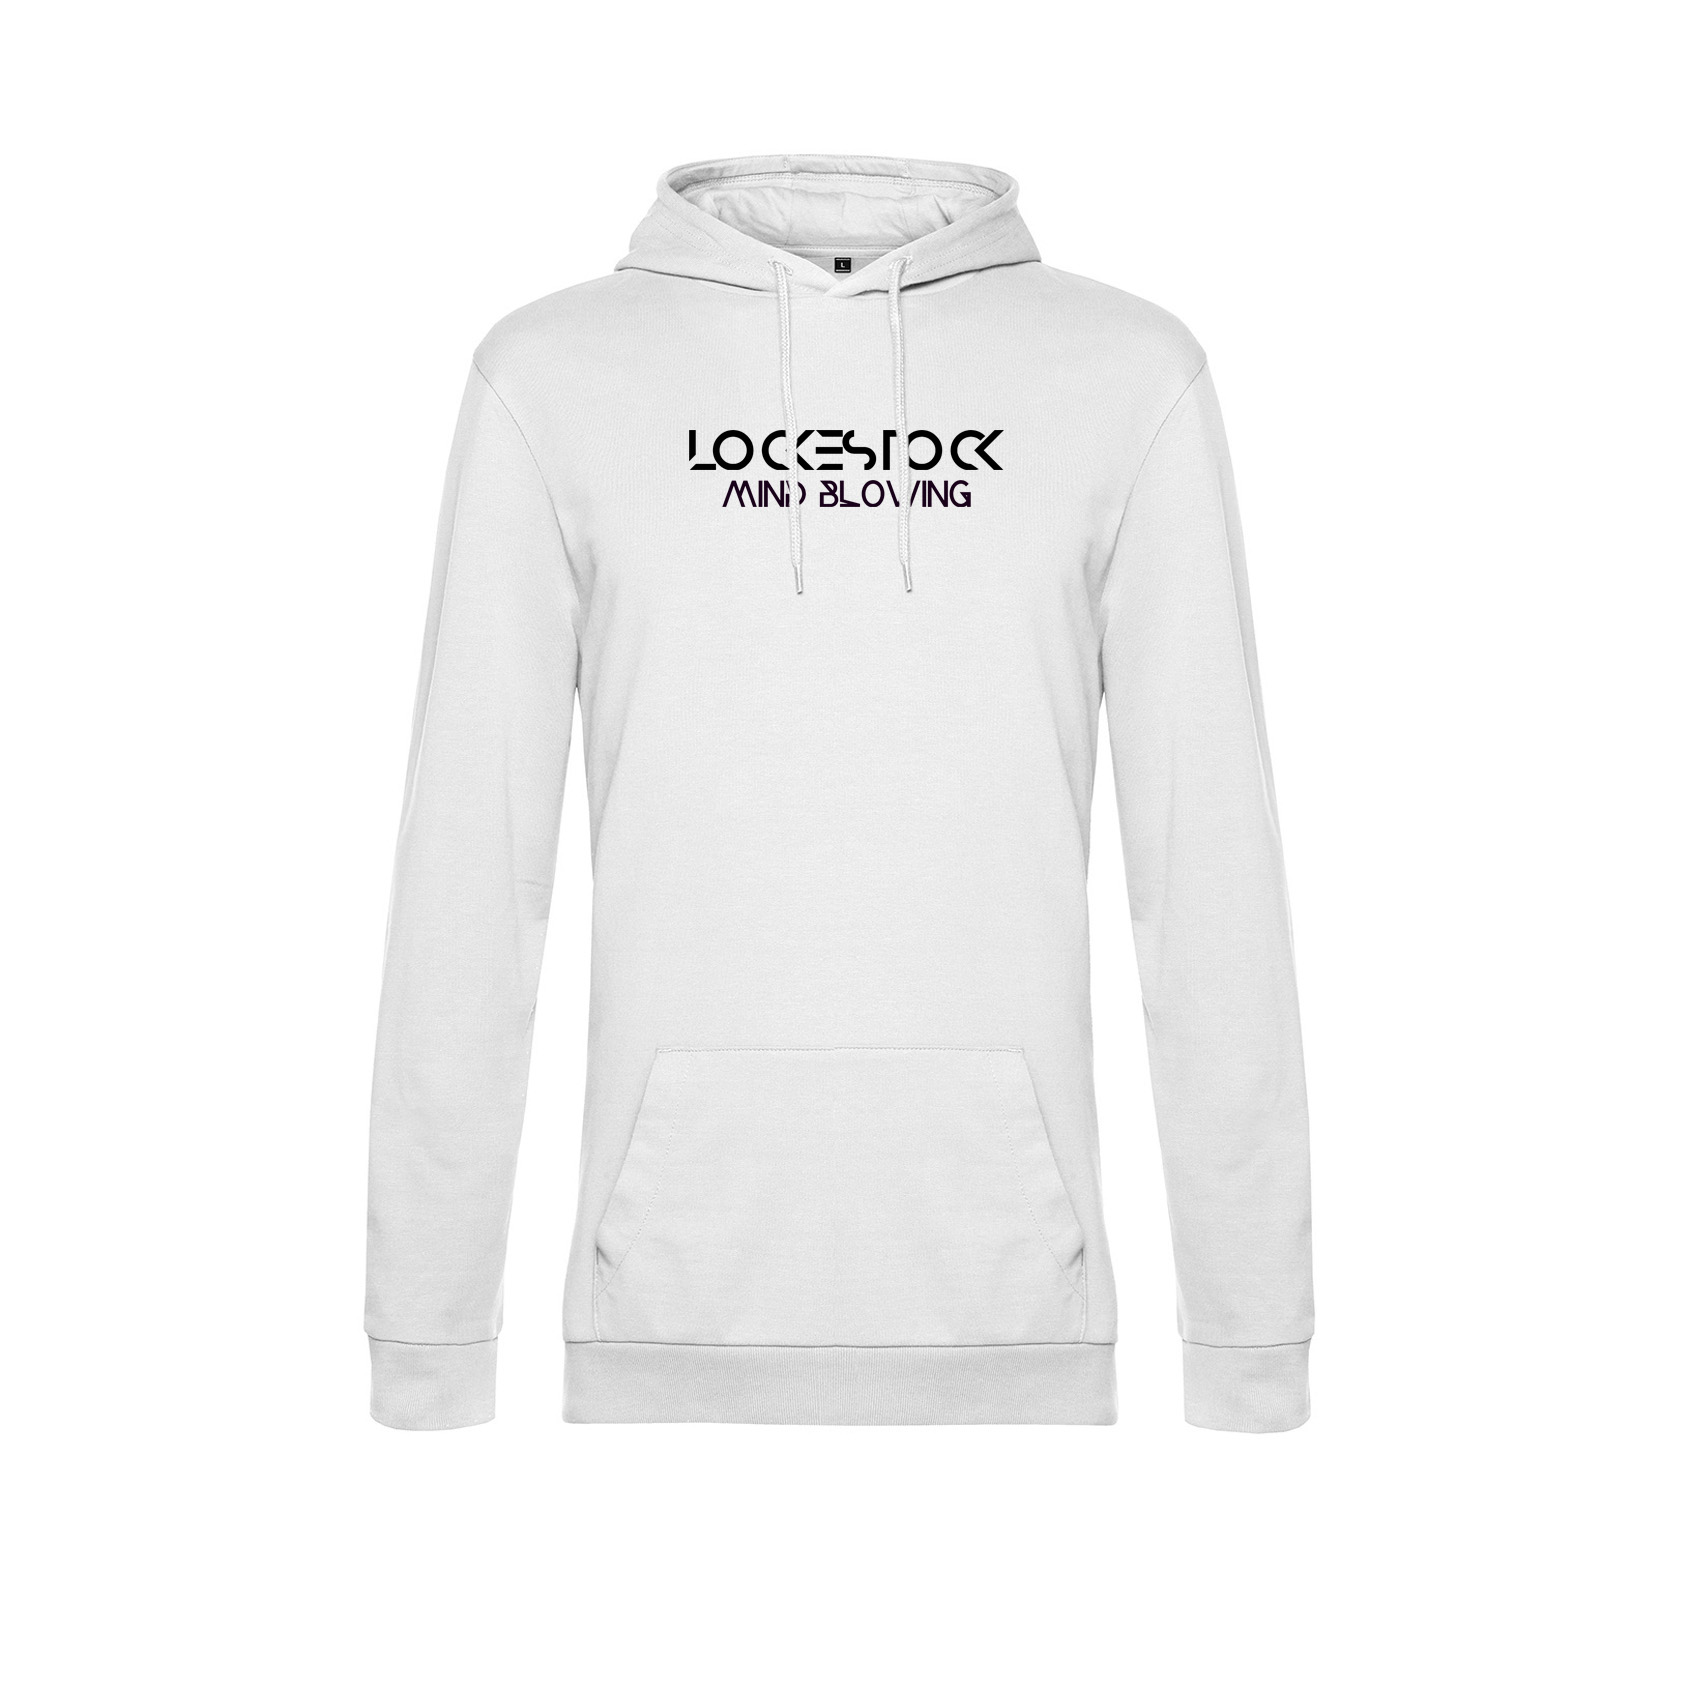 Hoodie White Front text